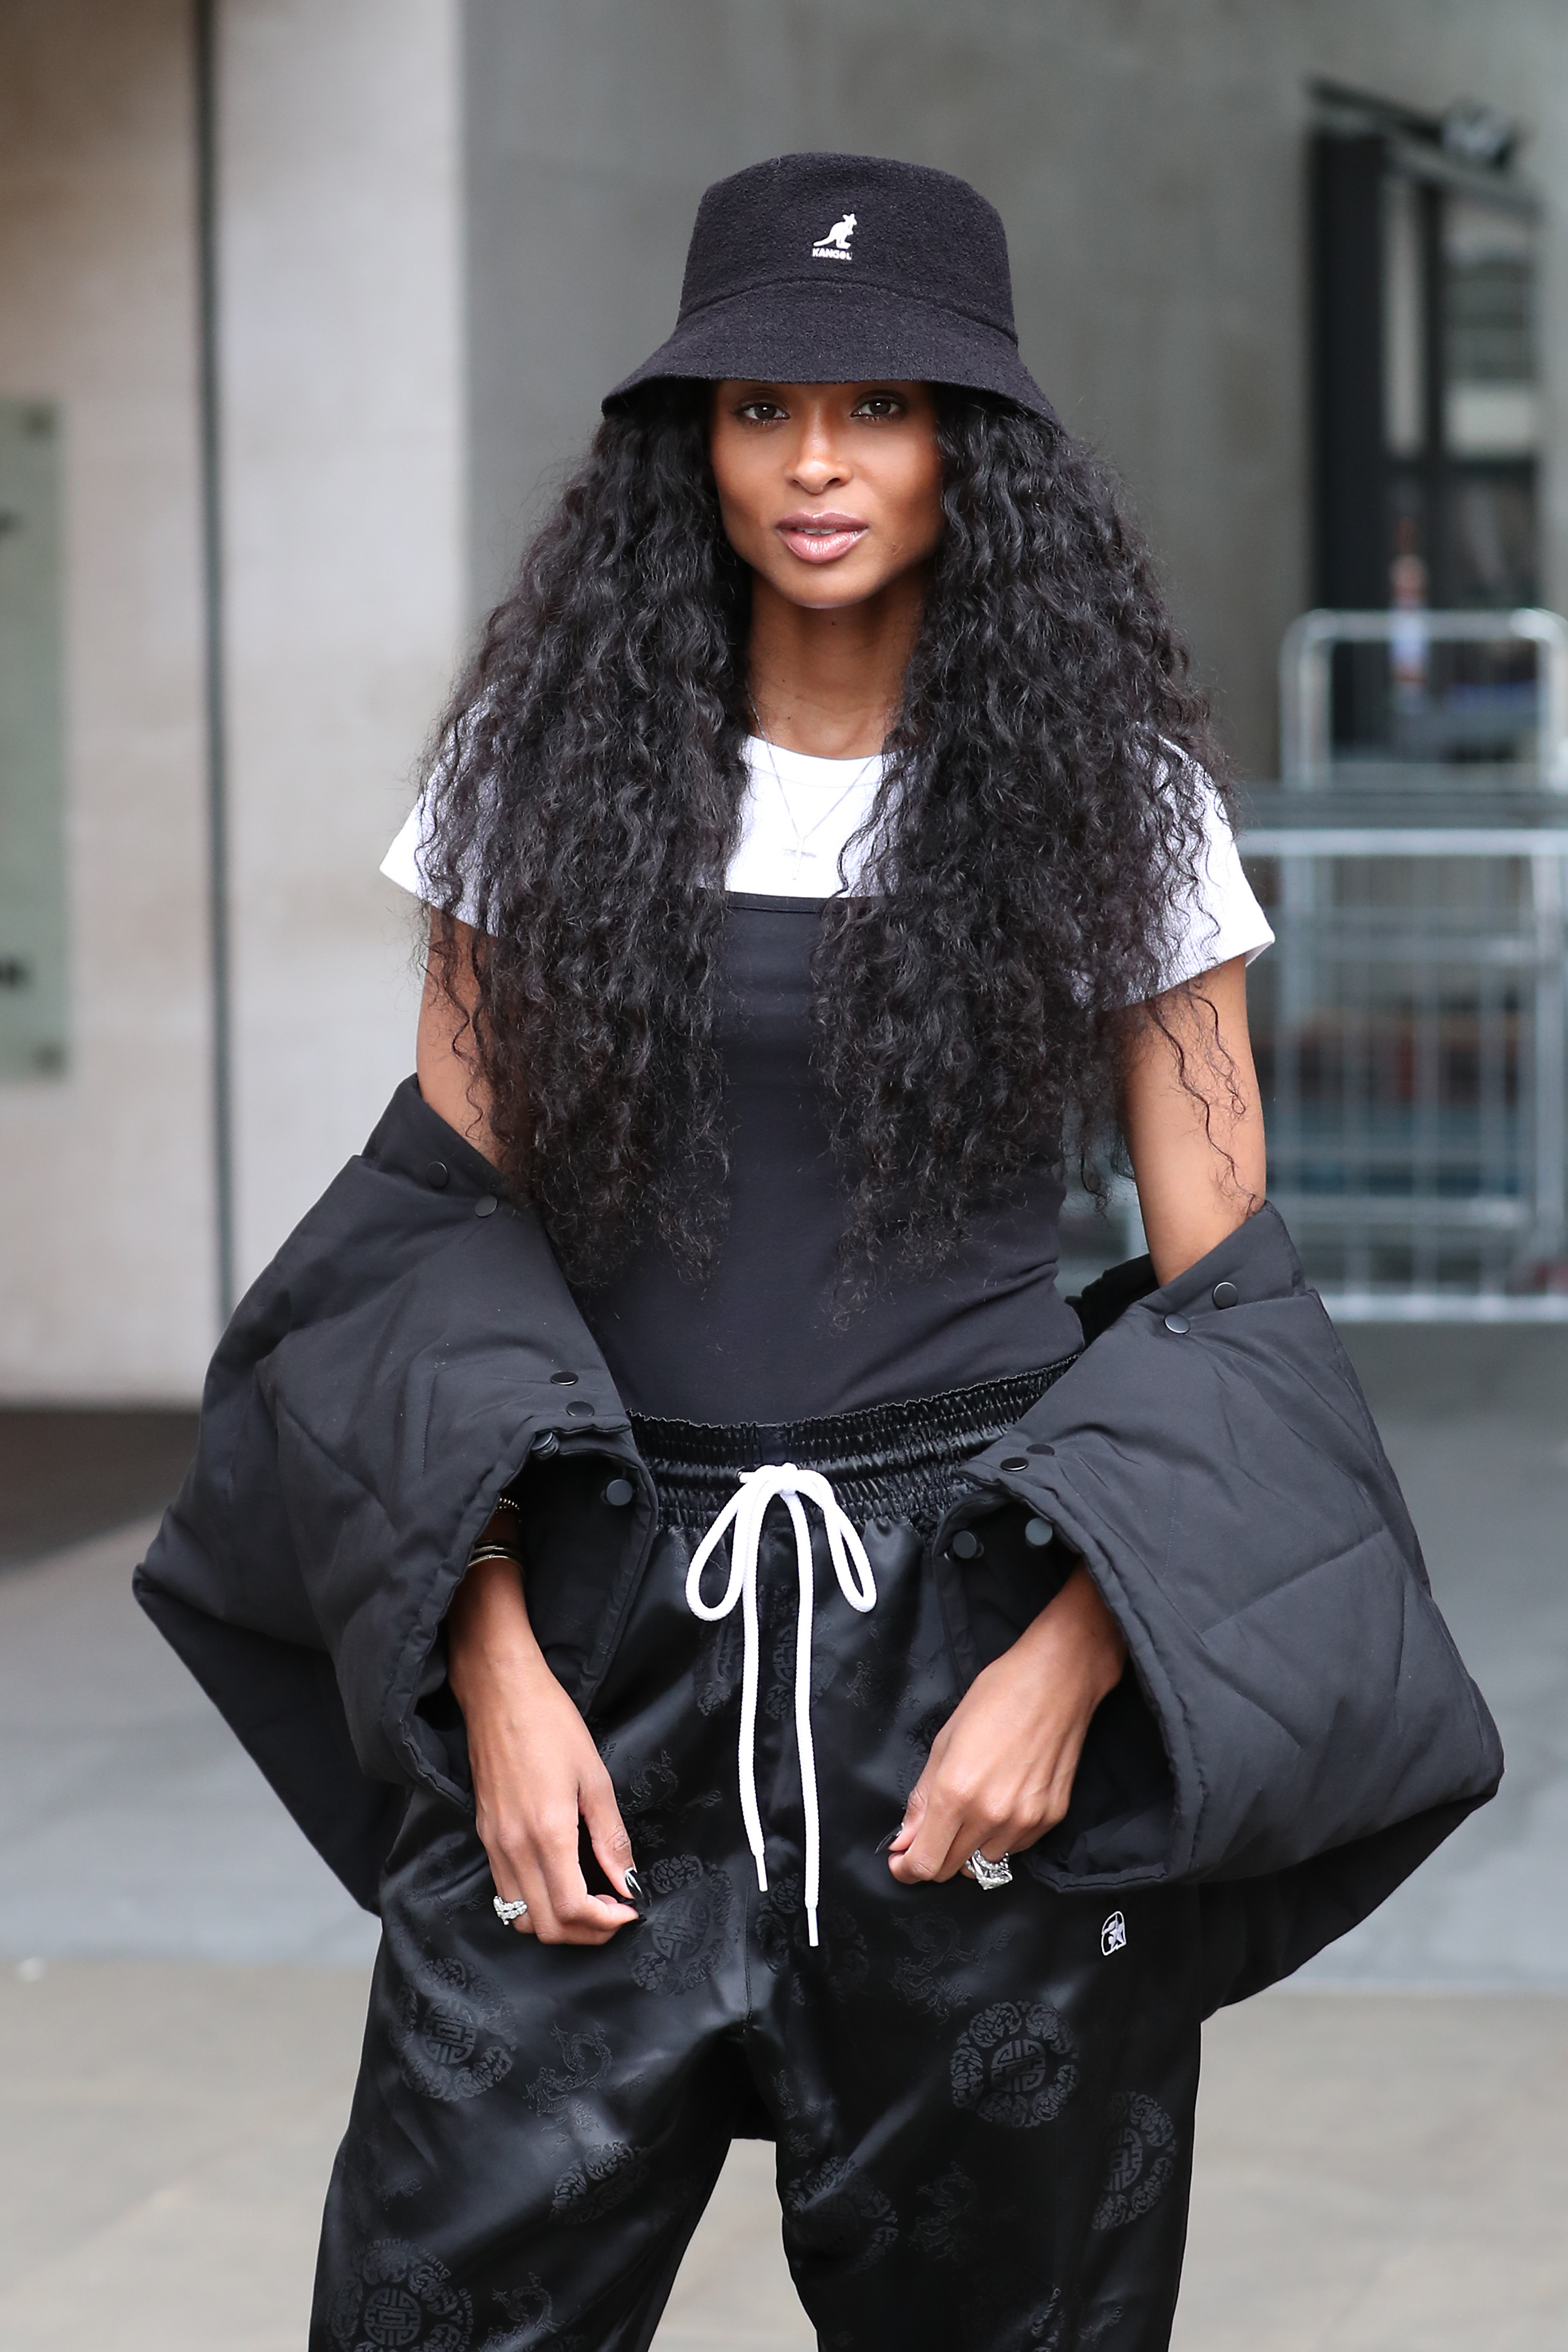 LONDON, ENGLAND - JUNE 20:  Ciara seen at the BBC Radio One studios on June 20, 2019 in London, England. (Photo by Neil Mockford/GC Images)